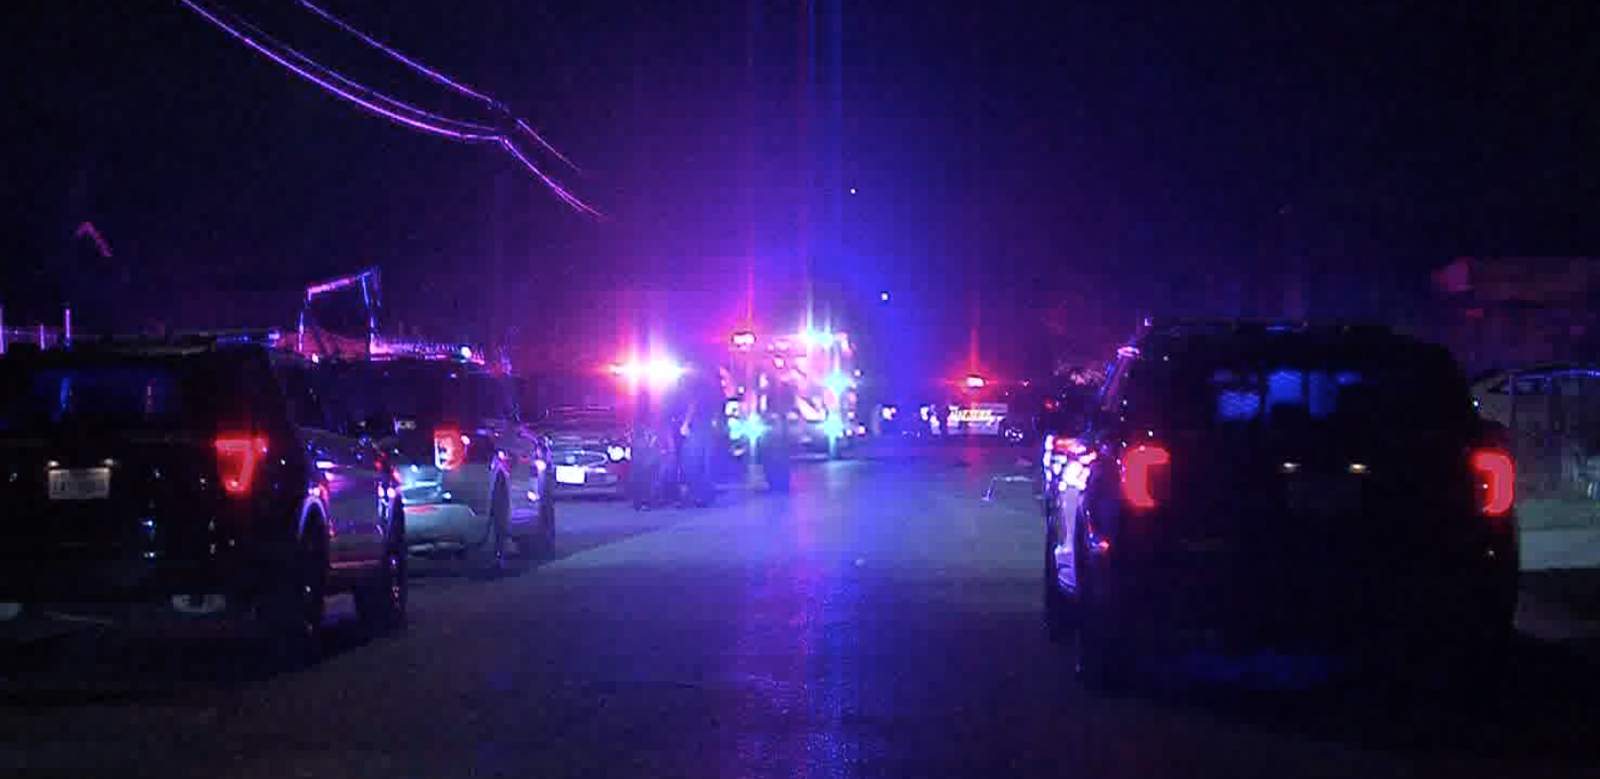 2 men hospitalized after argument ends with stabbing, San Antonio police say